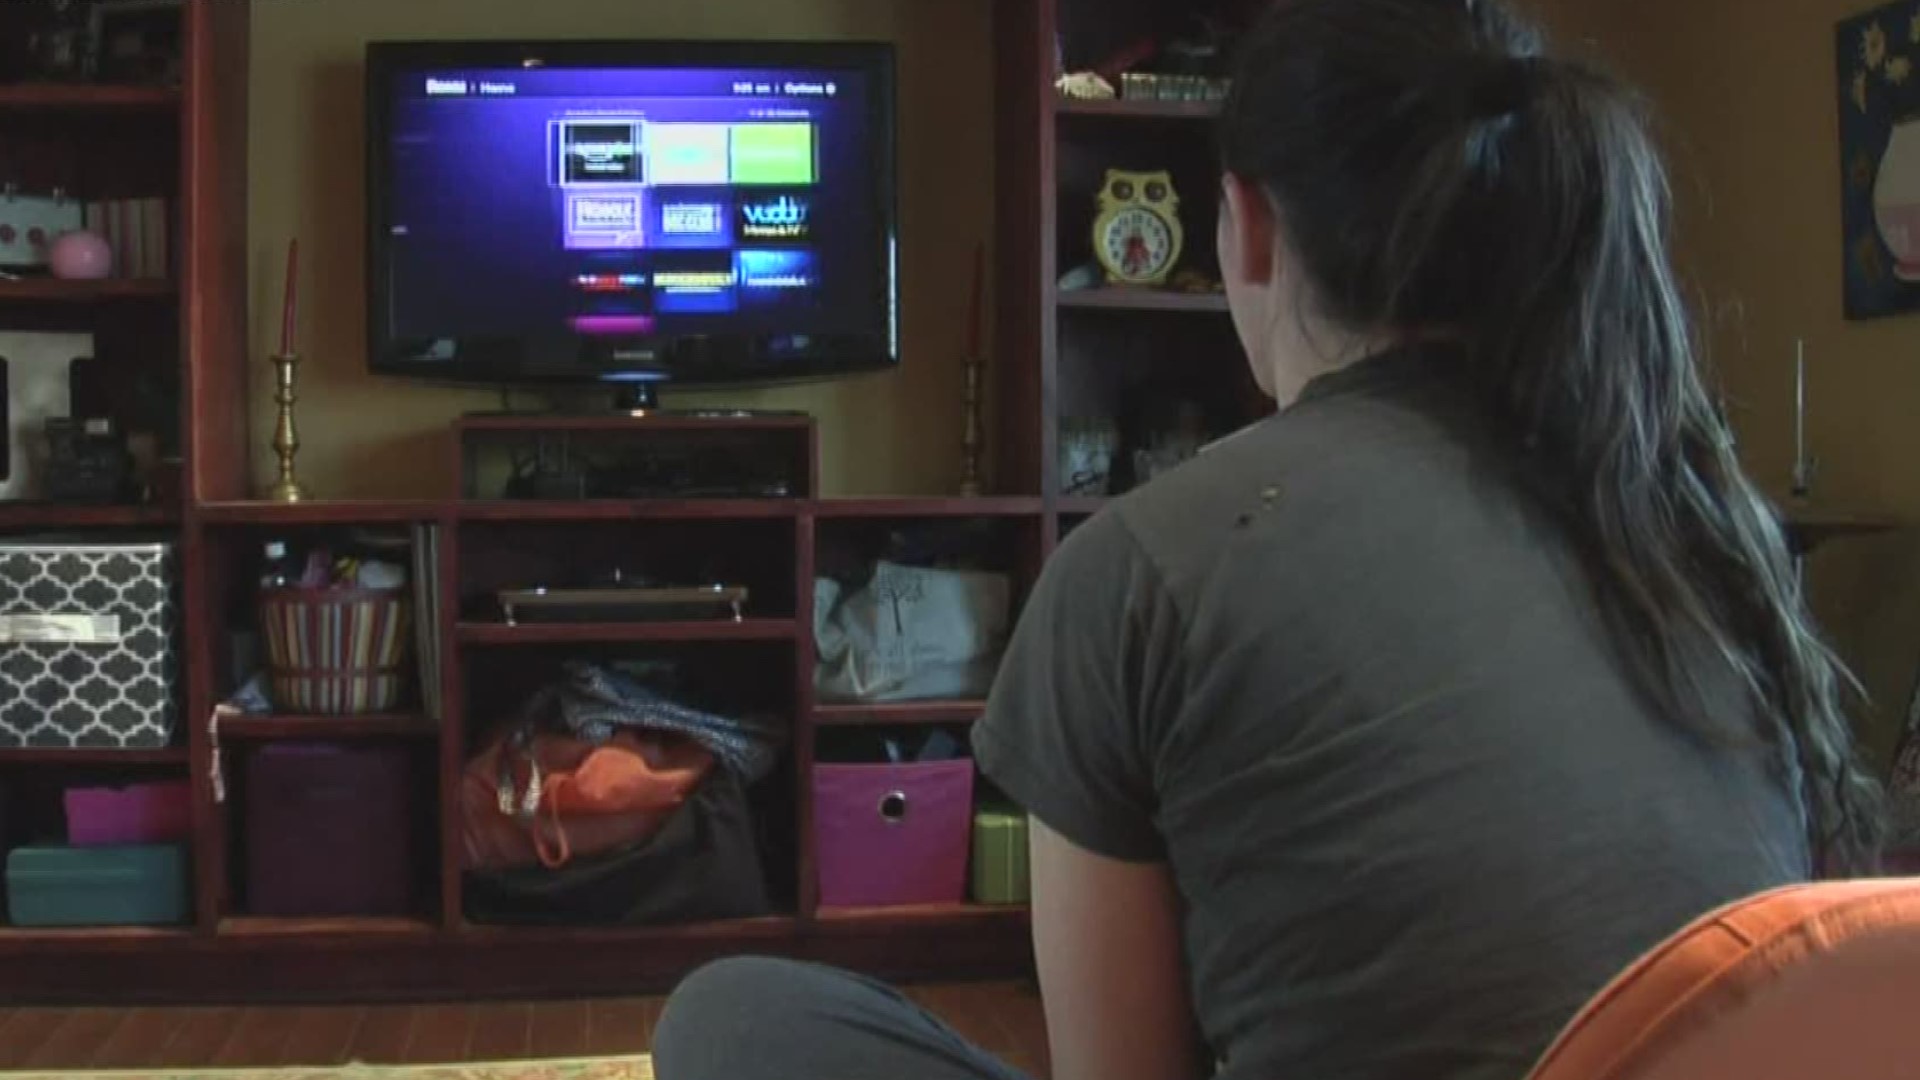 A group of TV cable companies is suing Maine over its new law that says customers need to have the option to subscribe to individual channels instead of have to choose a bundle.